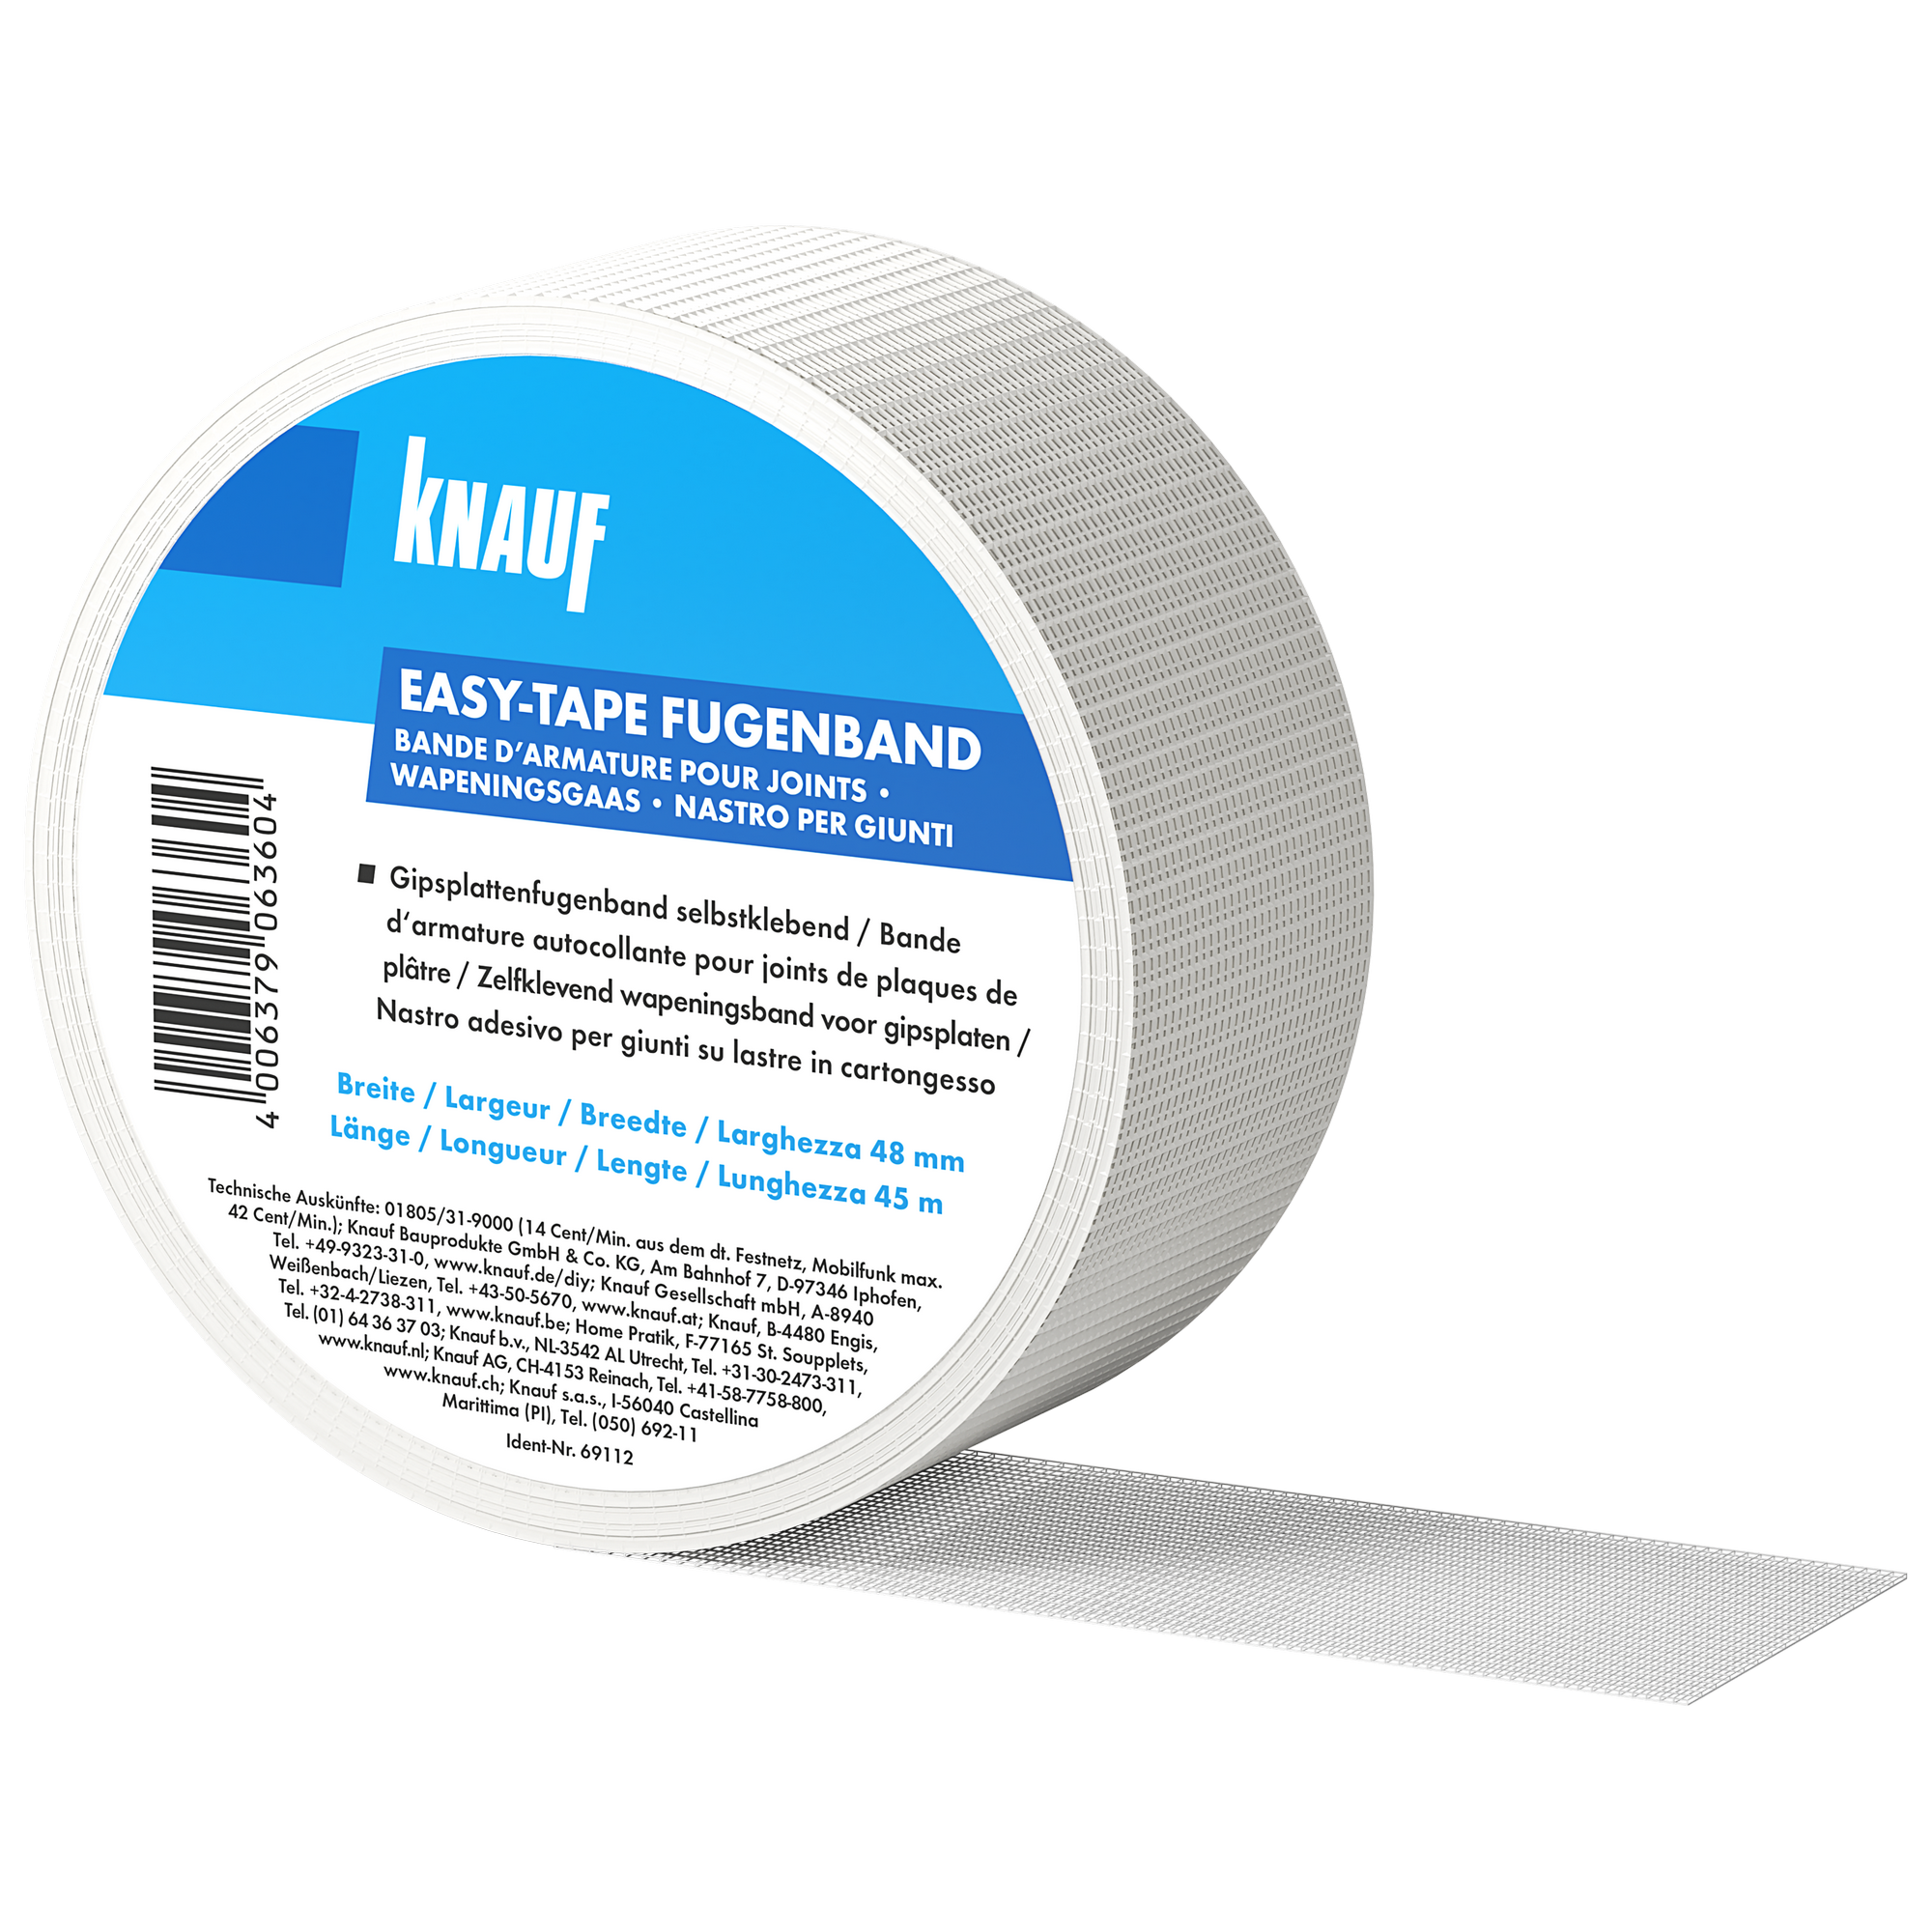 Fugenband 'easy-tape' 2000 x 4,8 cm + product picture